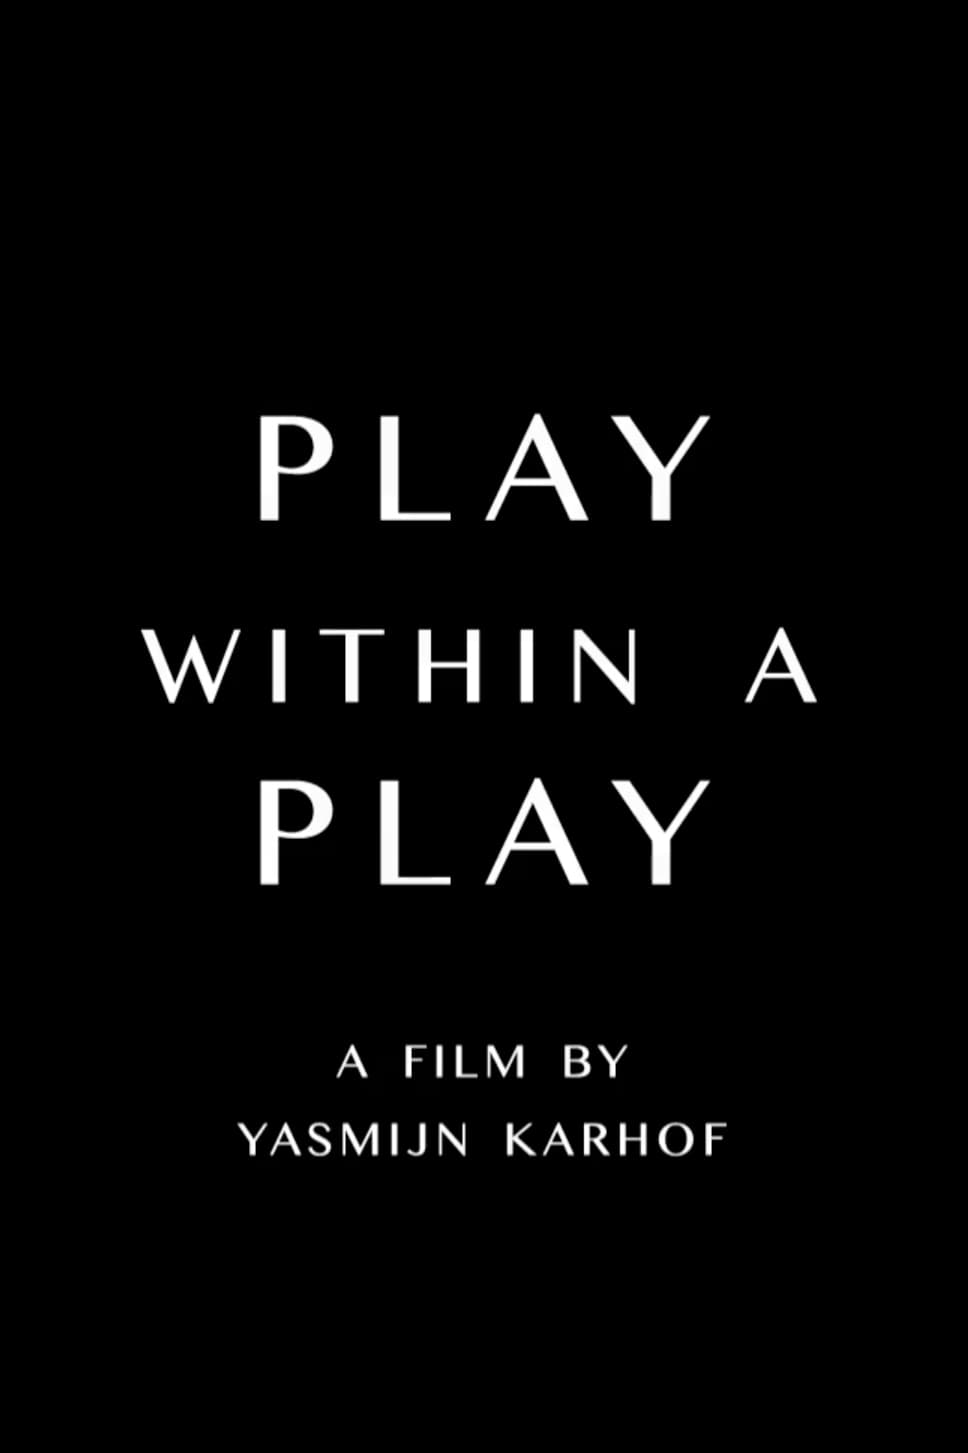 Play within a Play